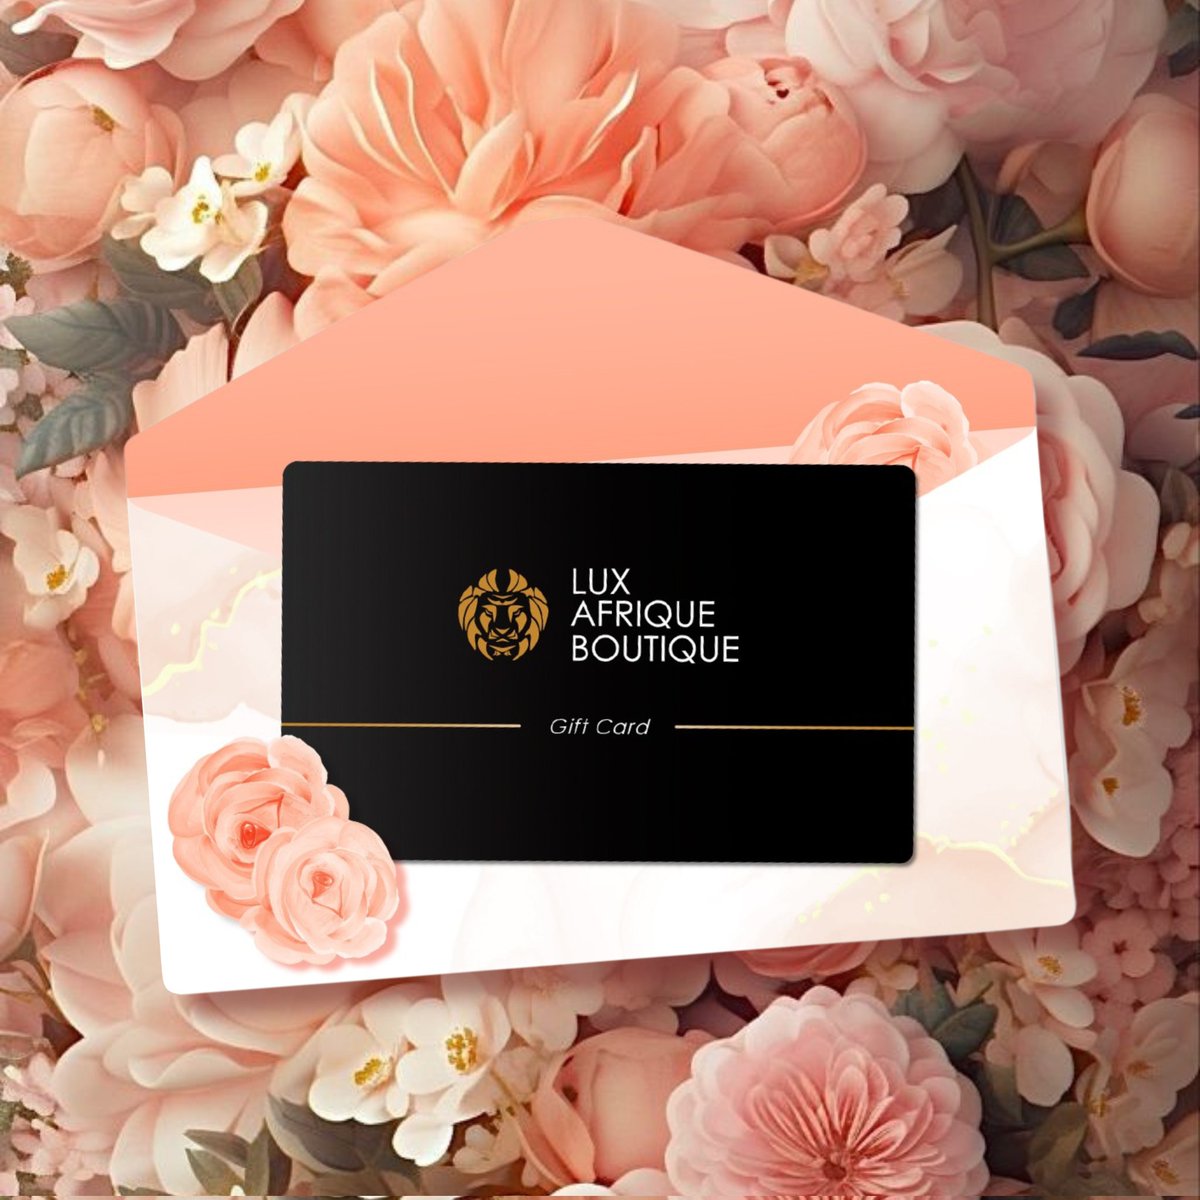 Are you still searching for the perfect Mother's Day gift?

Look no further! A gift card is the ultimate last-minute solution, giving mom the freedom to choose something she truly loves.

Get your gift card on #luxafriqueboutique: luxafrique.boutique/en-za/products…